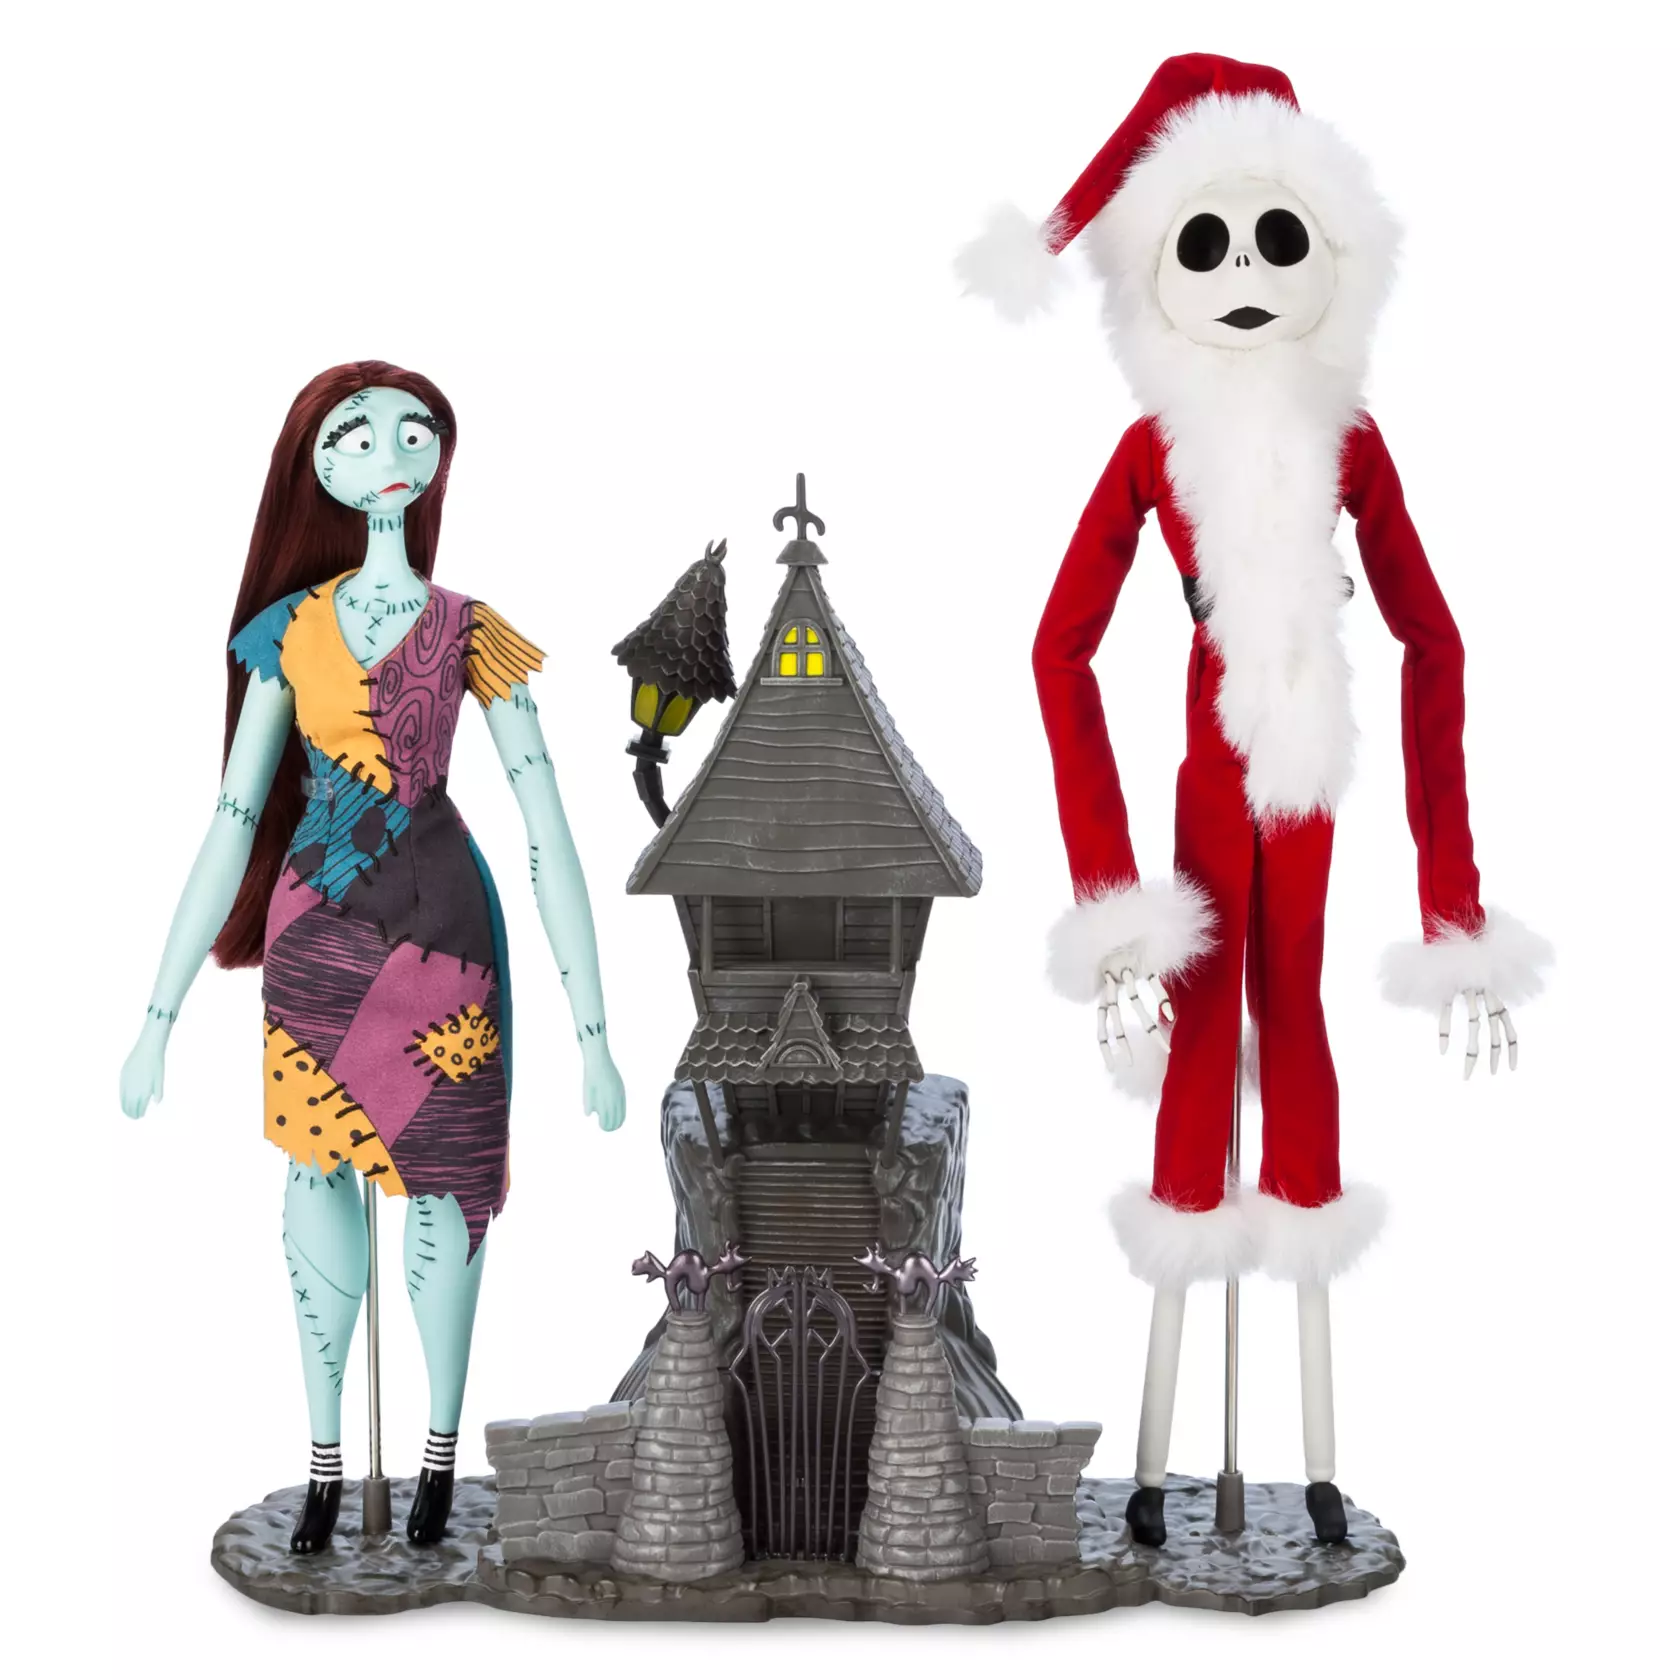 Disney Limited Edition 2 pack Jack Skellington and Sally dolls The